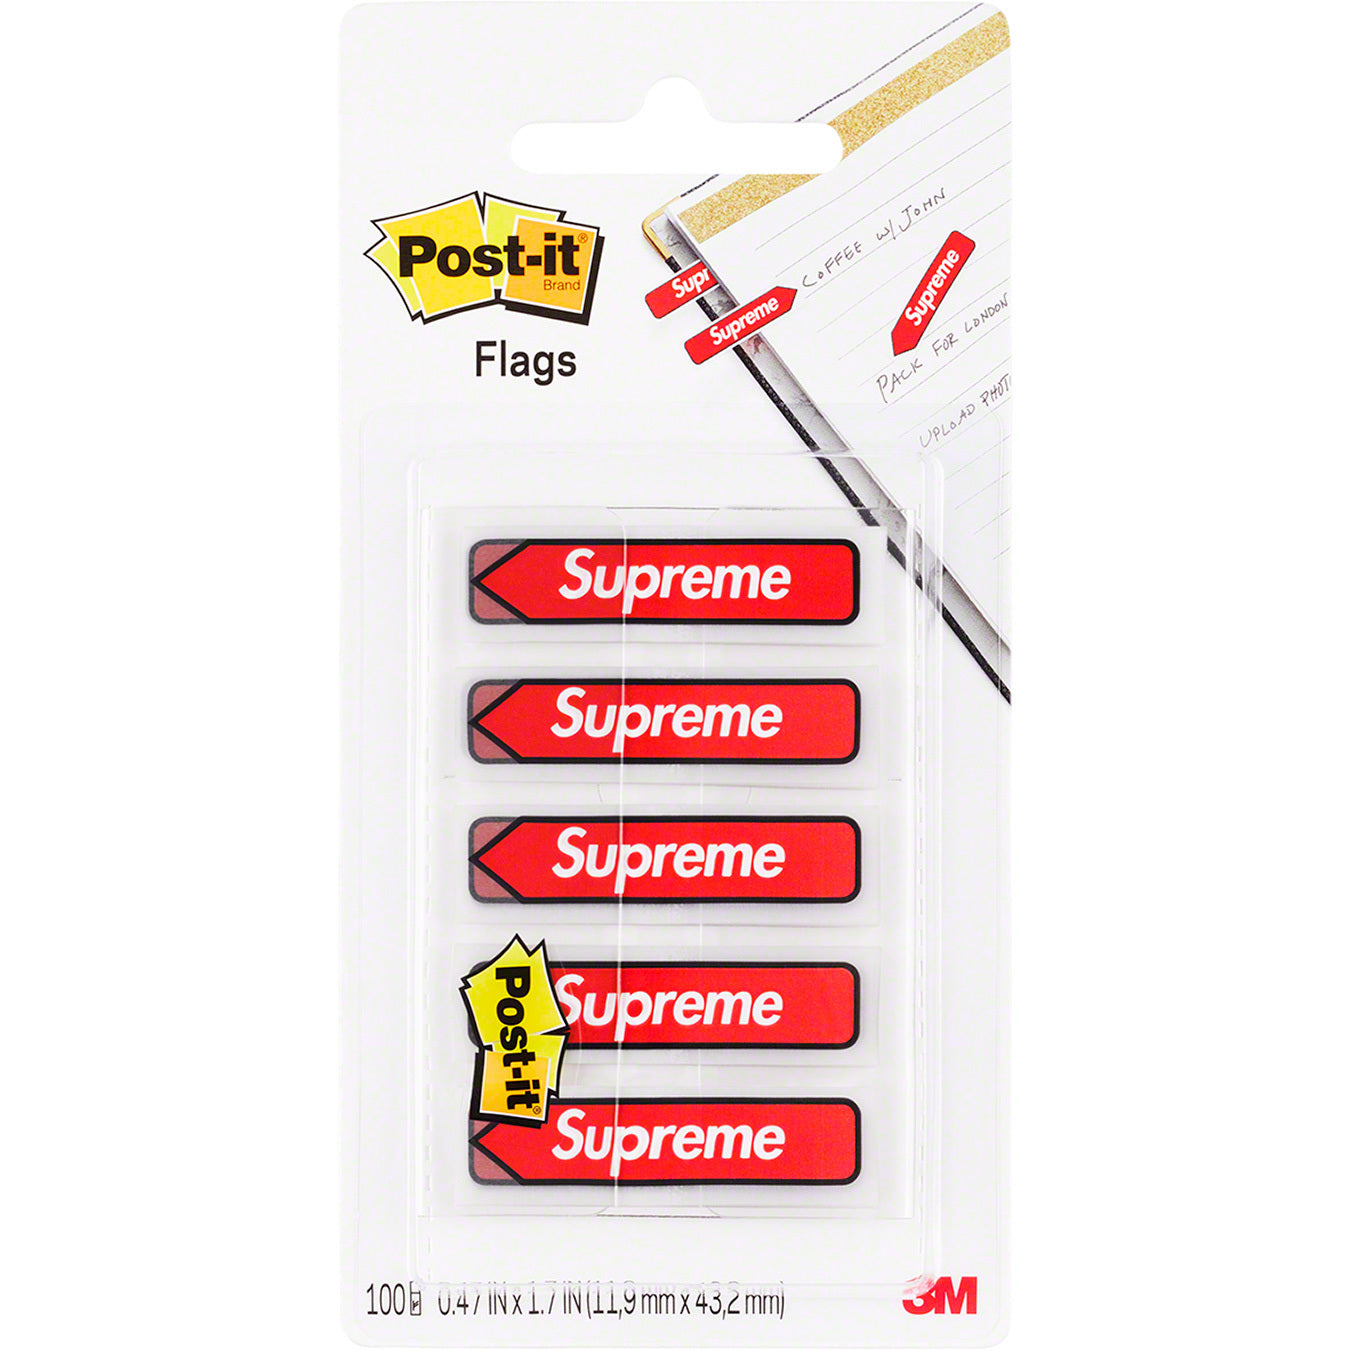 Supreme Post-it Flags from Supreme